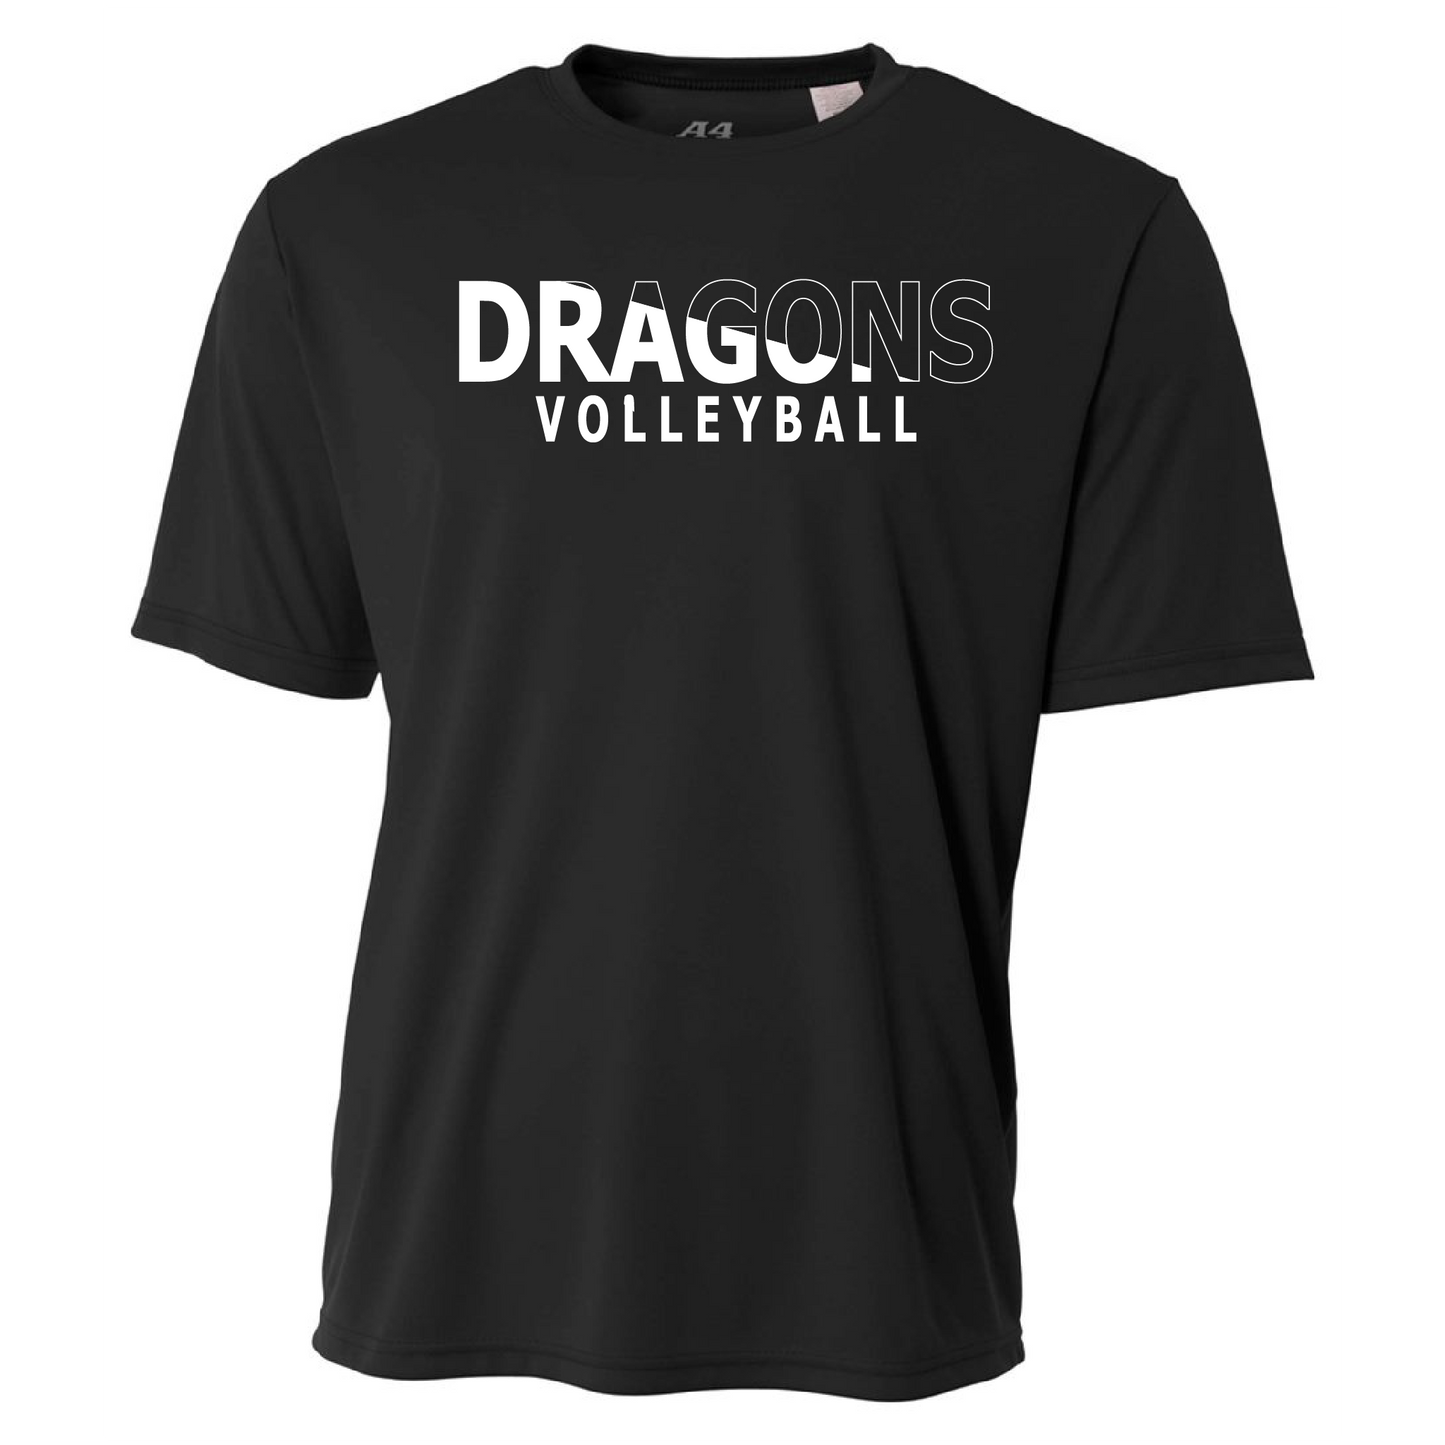 Mens S/S T-Shirt - Dragons Volleyball Slashed White